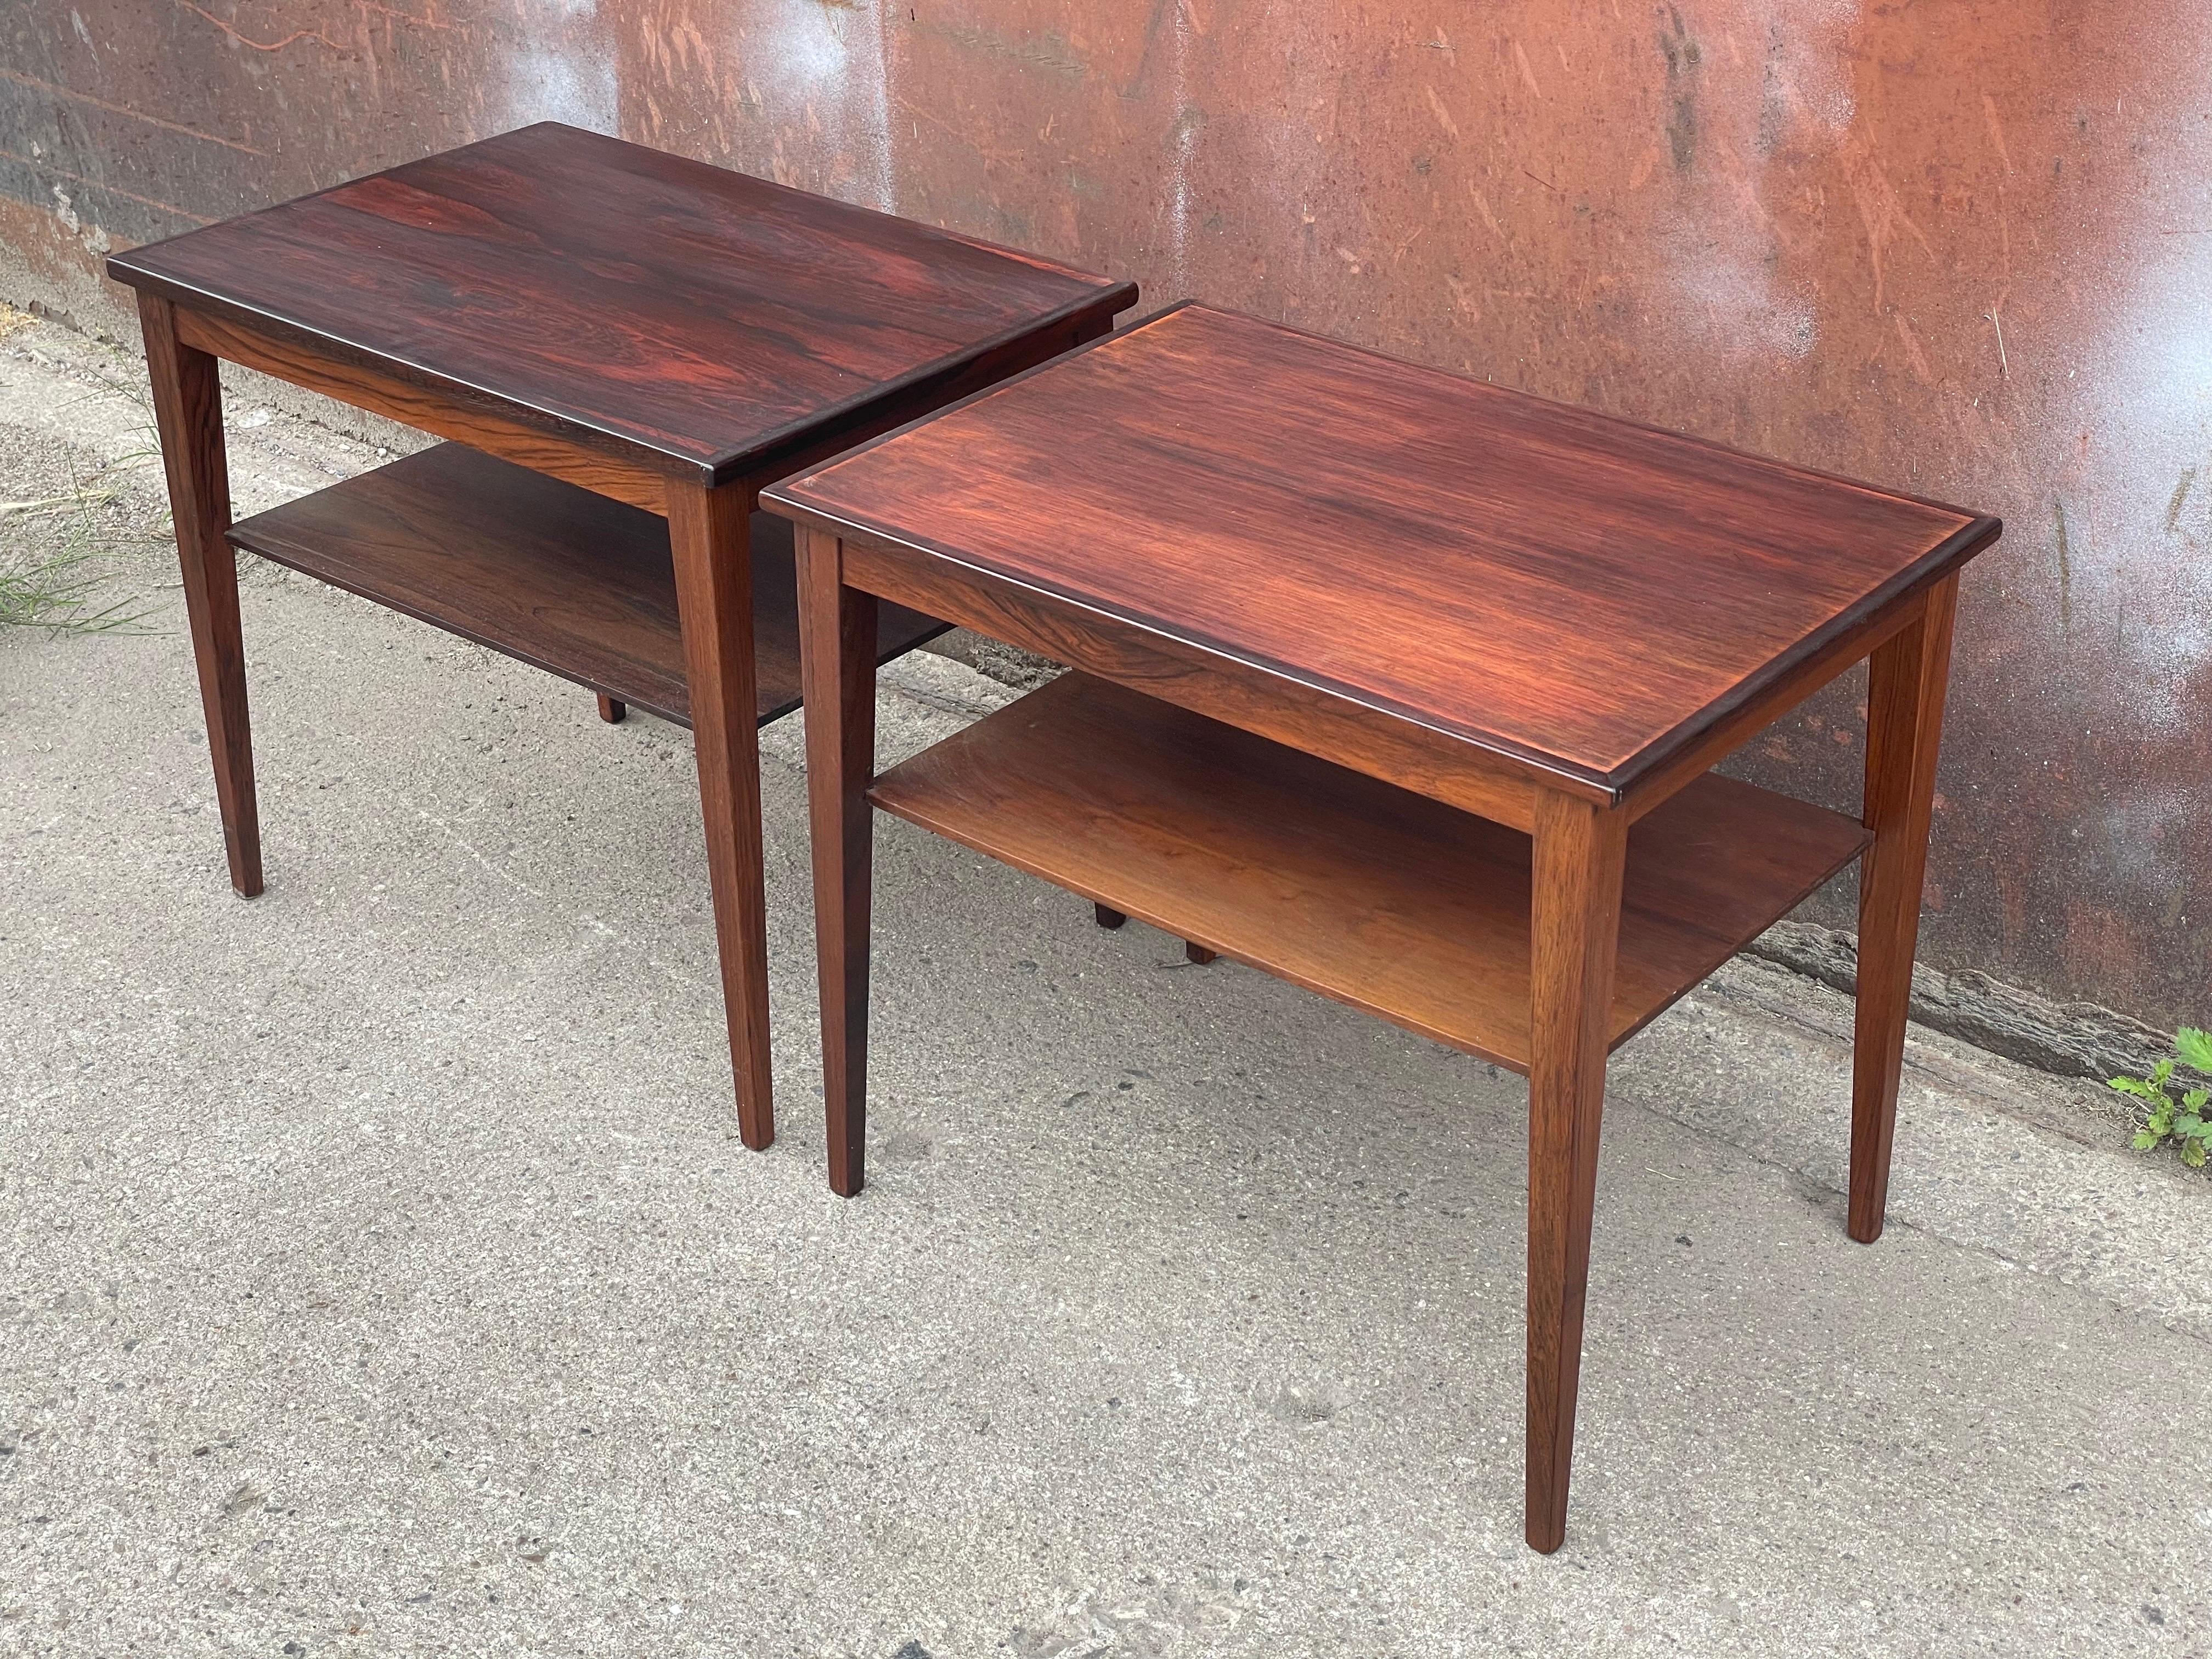 Hardwood Pair of Danish Mid-Century Modern Nightstands or Sidetables from the, 1960s For Sale